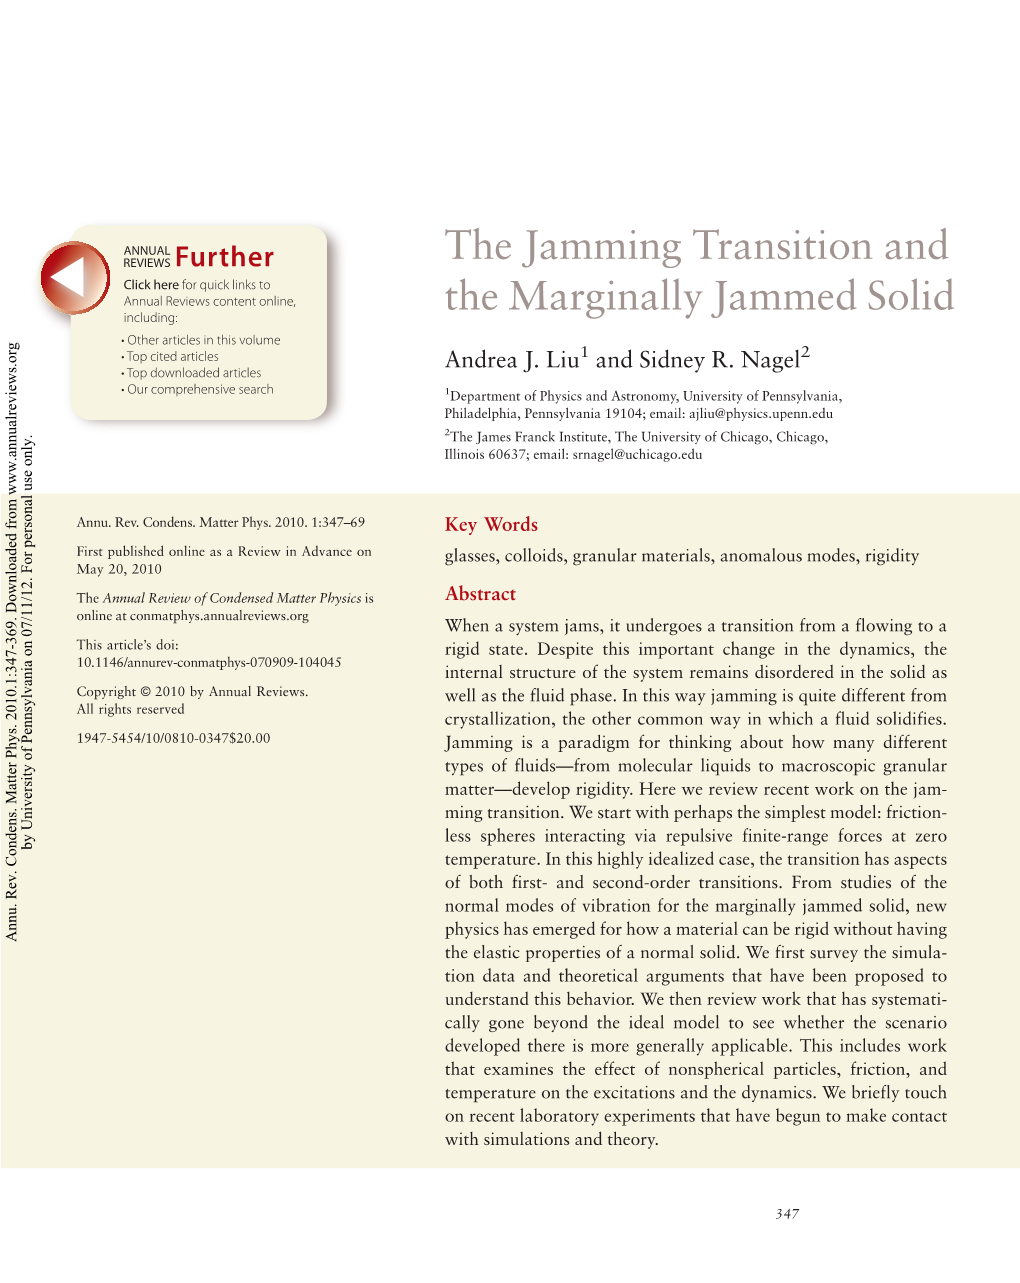 The Jamming Transition and the Marginally Jammed Solid